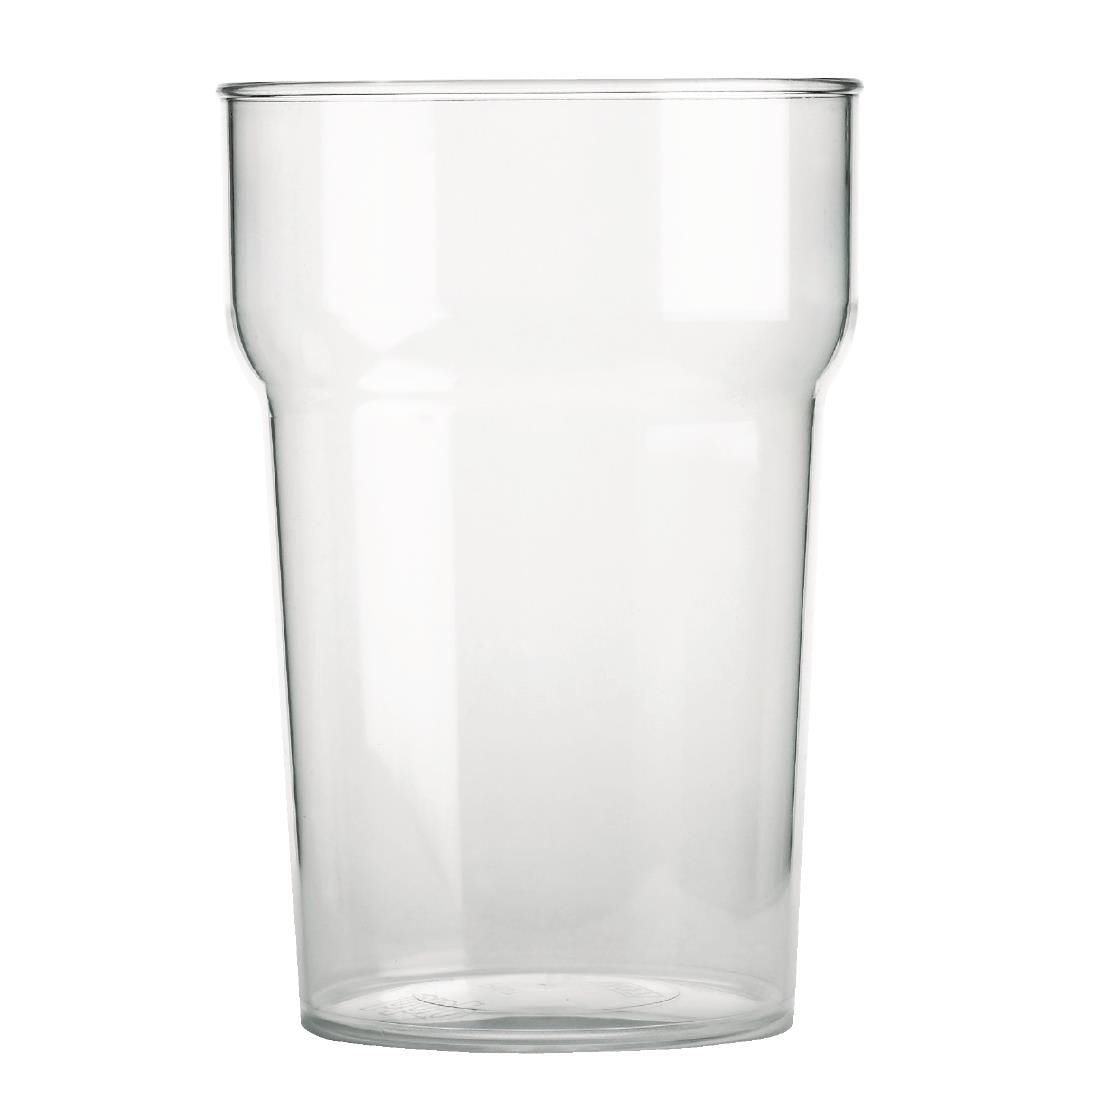 BBP Polycarbonate Nonic Pint Glasses 570ml CE Marked (Pack of 48) JD Catering Equipment Solutions Ltd